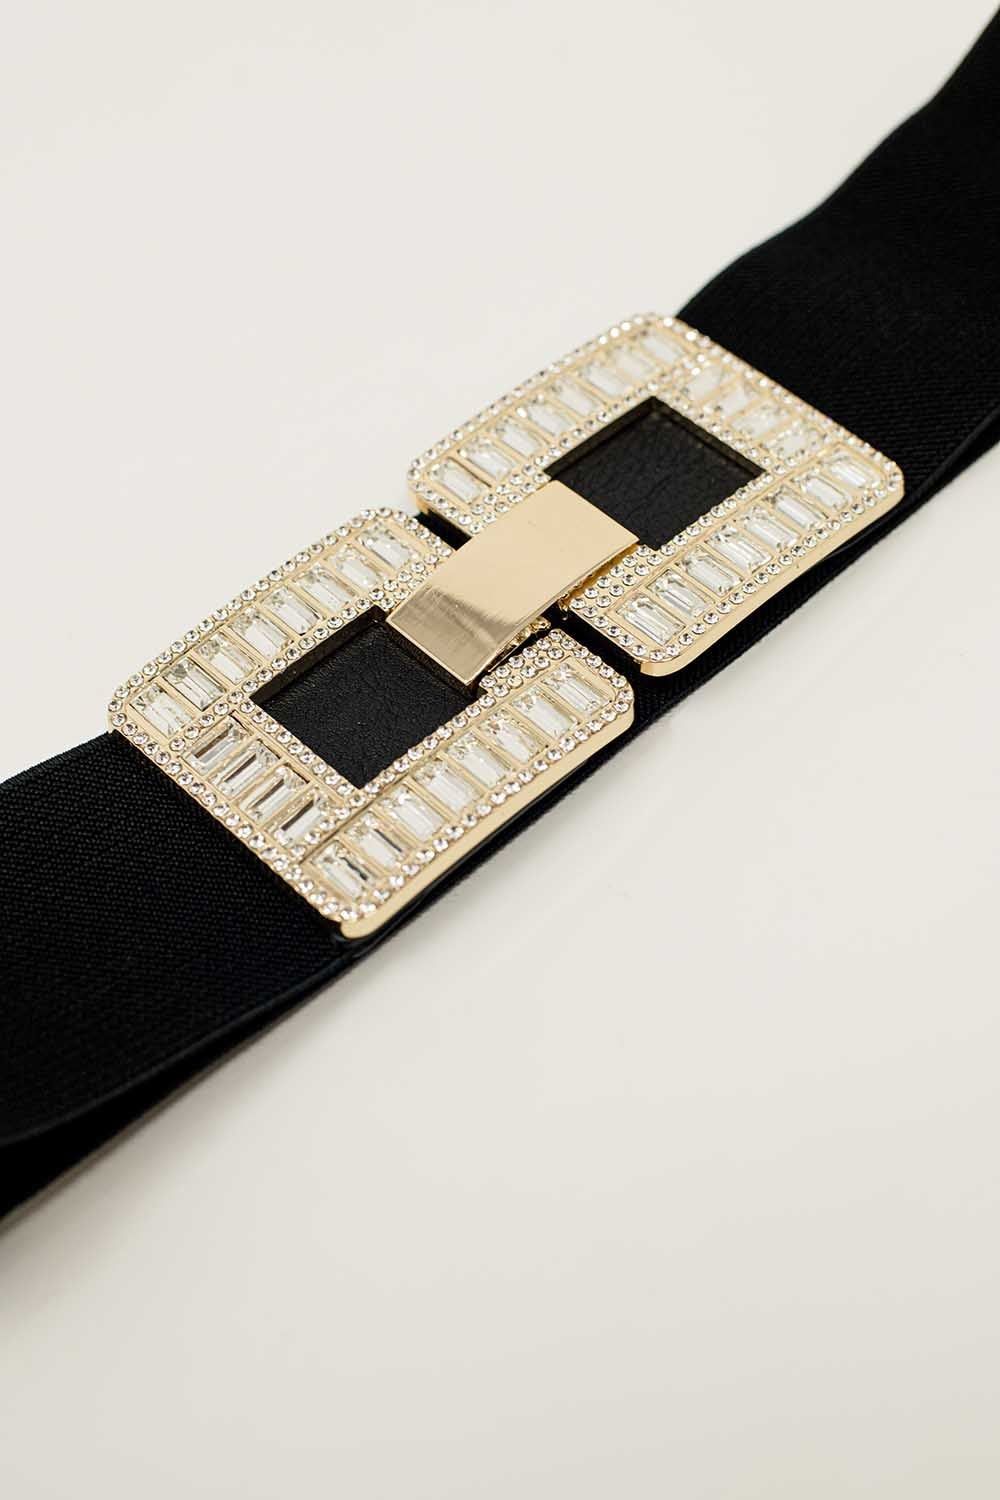 Black Elastic Belt With Double-Closing Square Buckle in Rhinestones and Metal